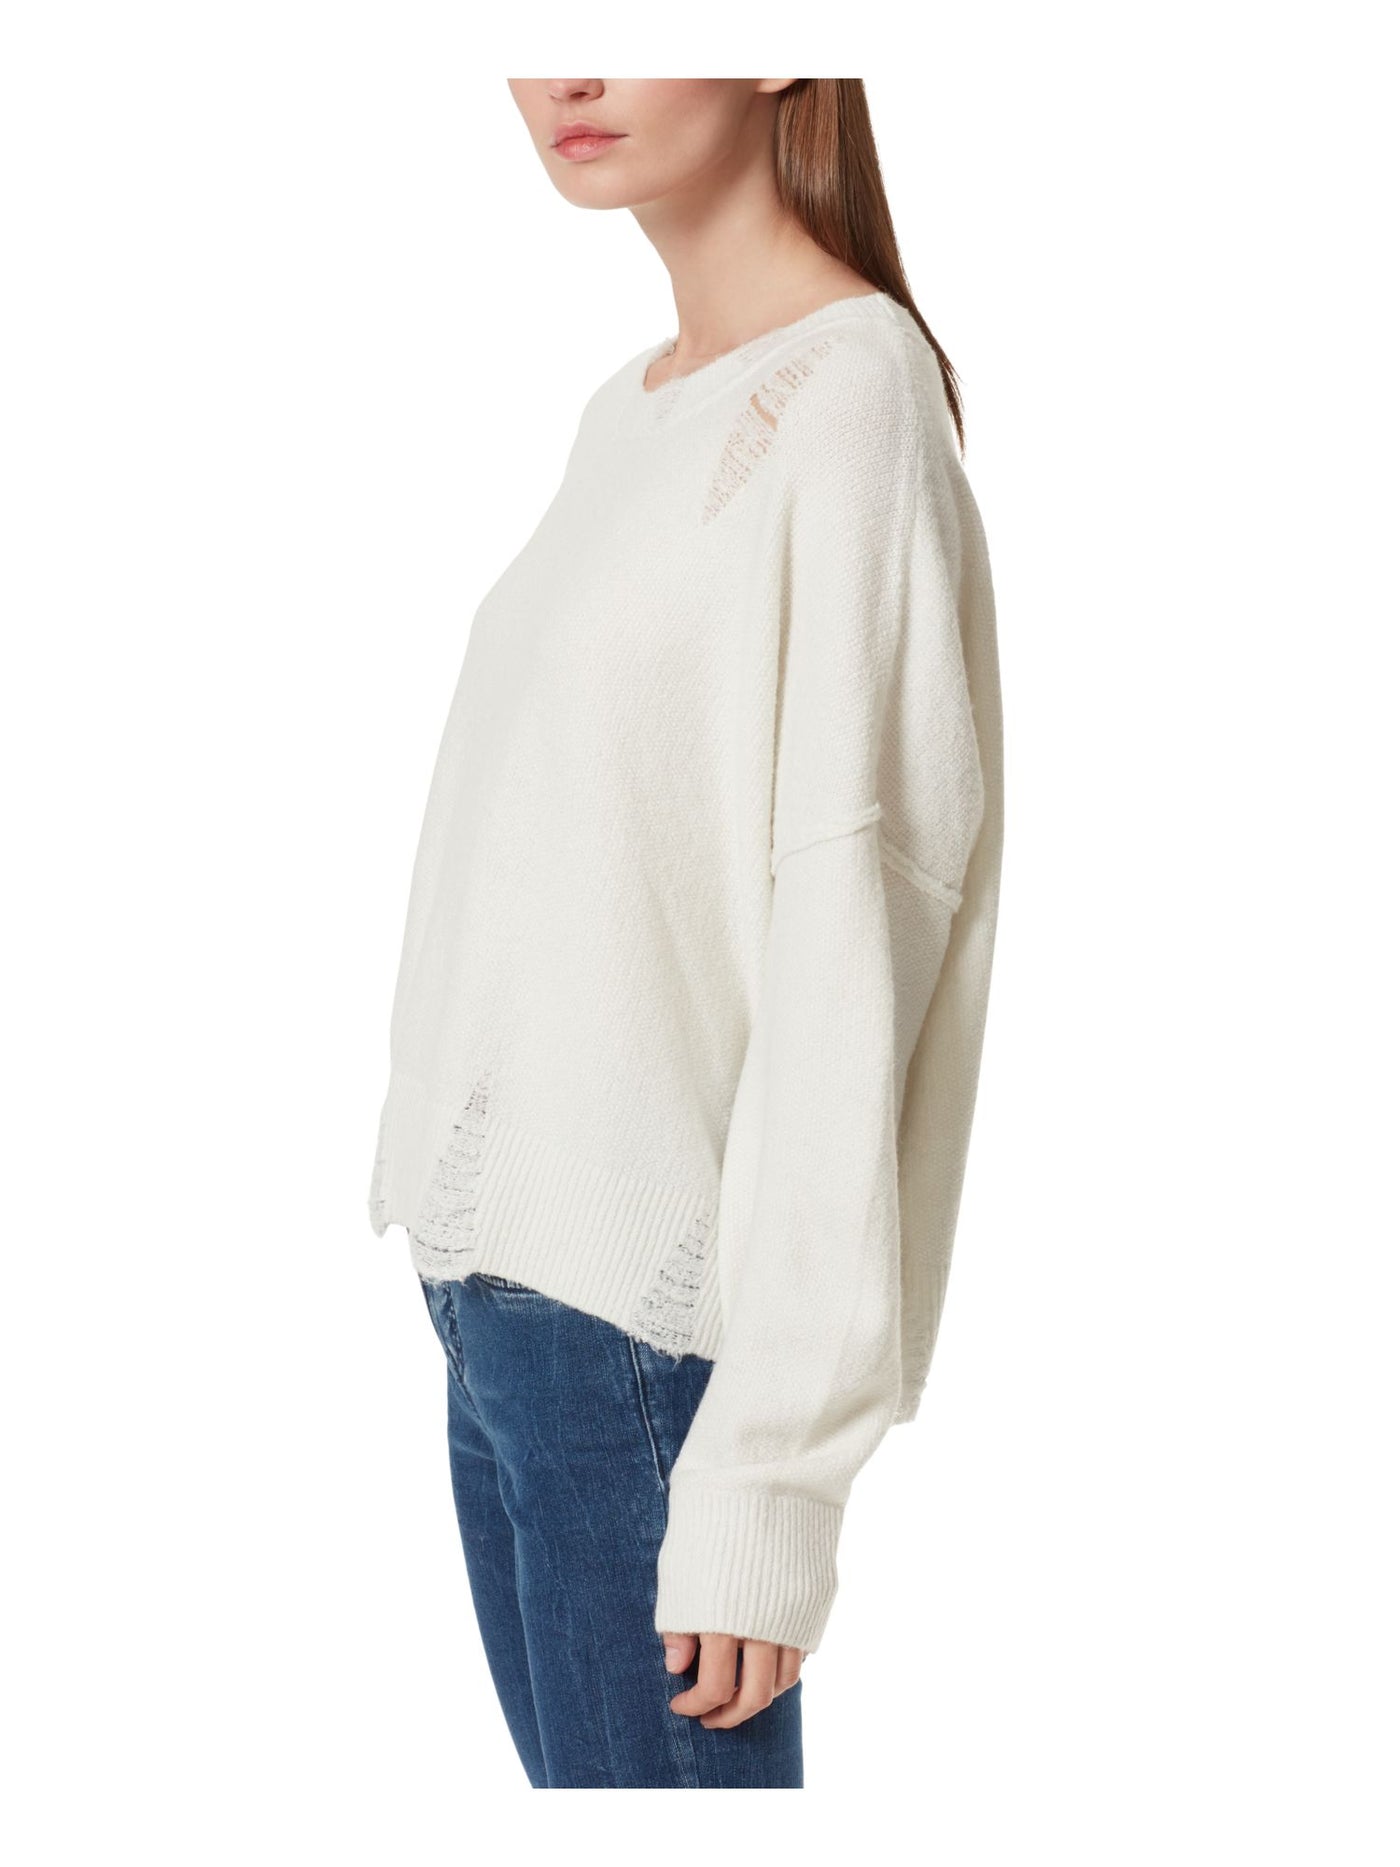 FRAYED Womens White Distressed Frayed Sheer Ribbed Long Sleeve Crew Neck Sweater L